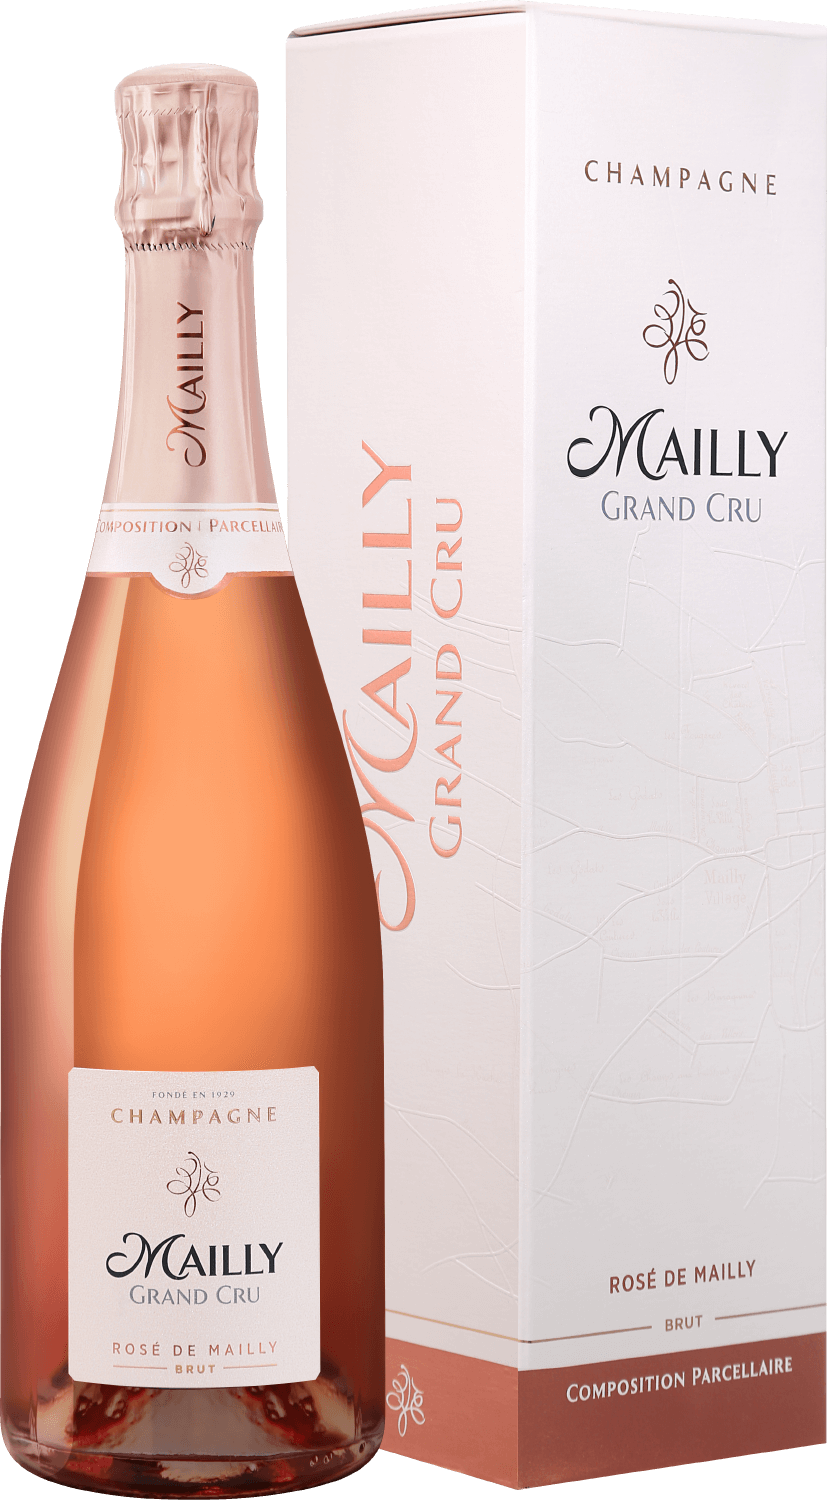 Mailly Grand Cru Rose de Mailly Brut Champagne AOC (gift box) mailly grand cru l’intemporelle brut millesime champagne аос gift box